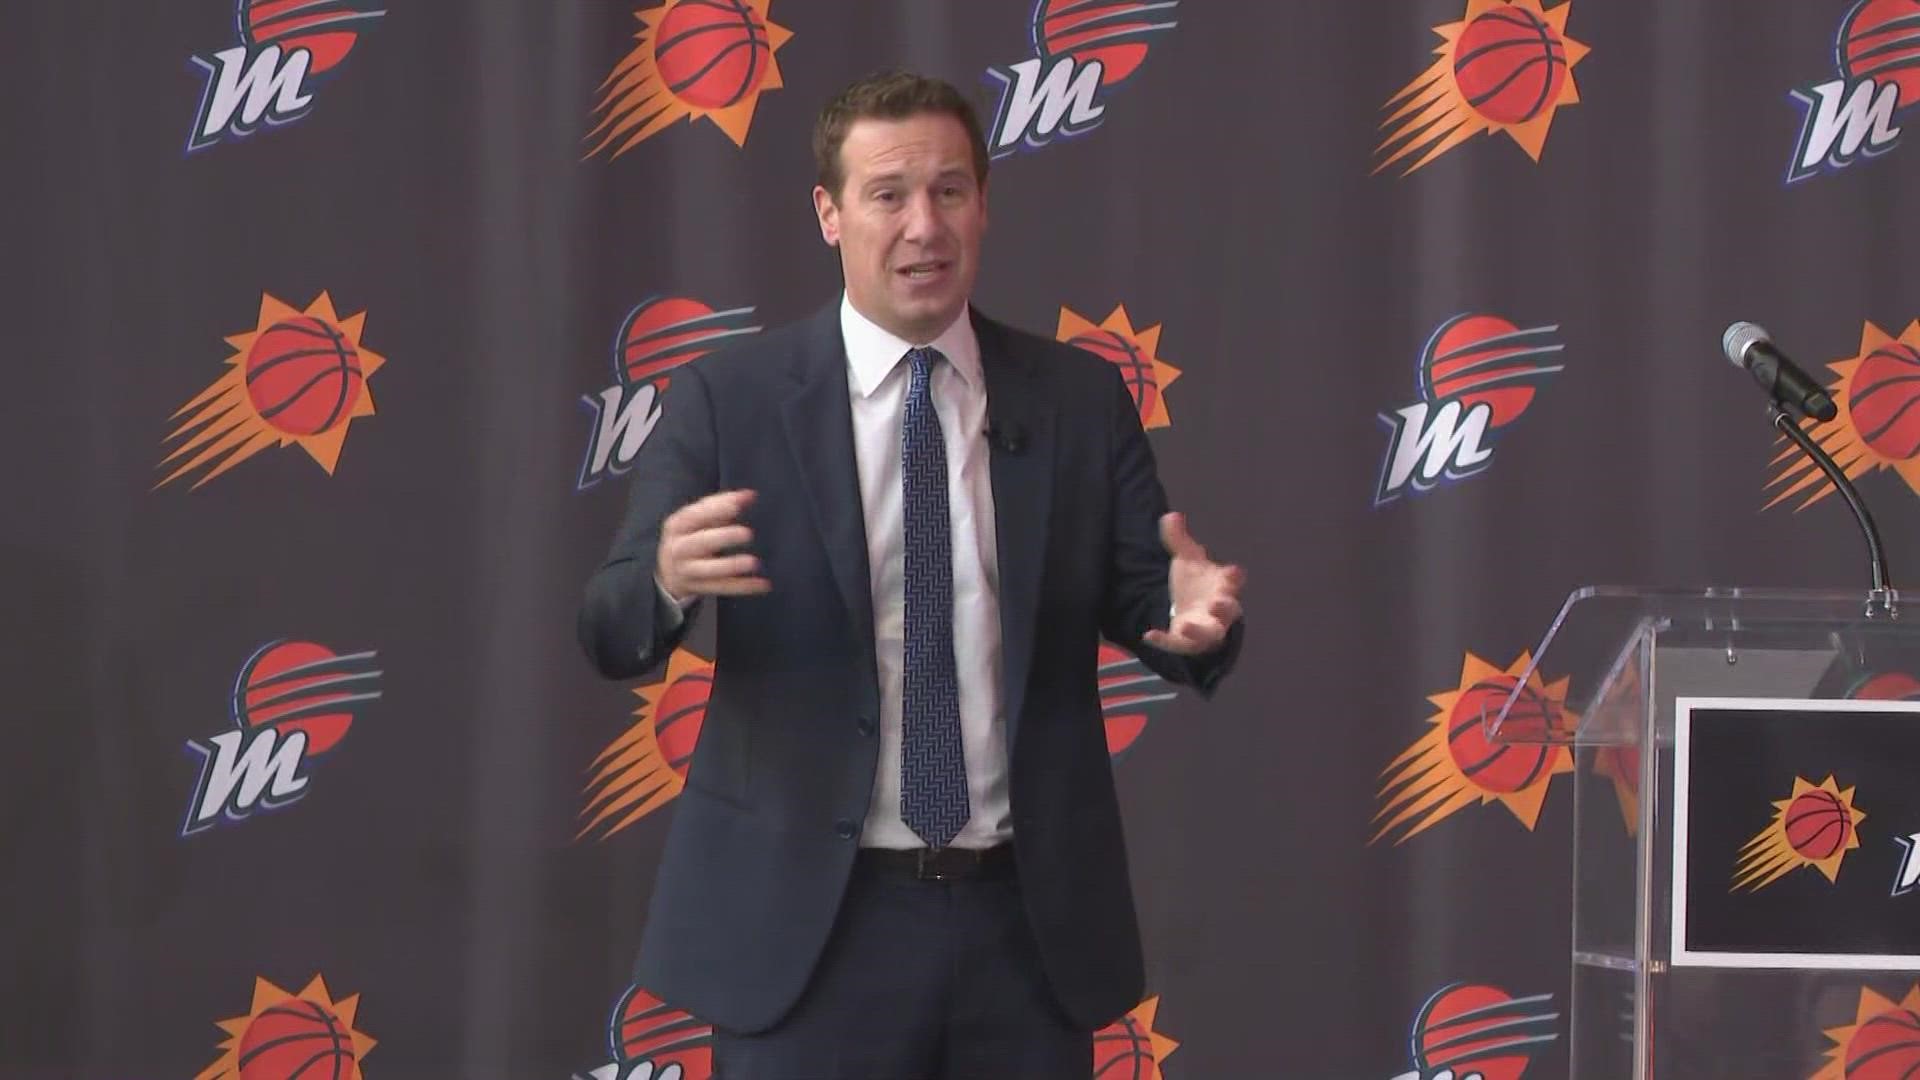 The Phoenix Suns introduced Mat Ishbia as the team's new owner on Wednesday.